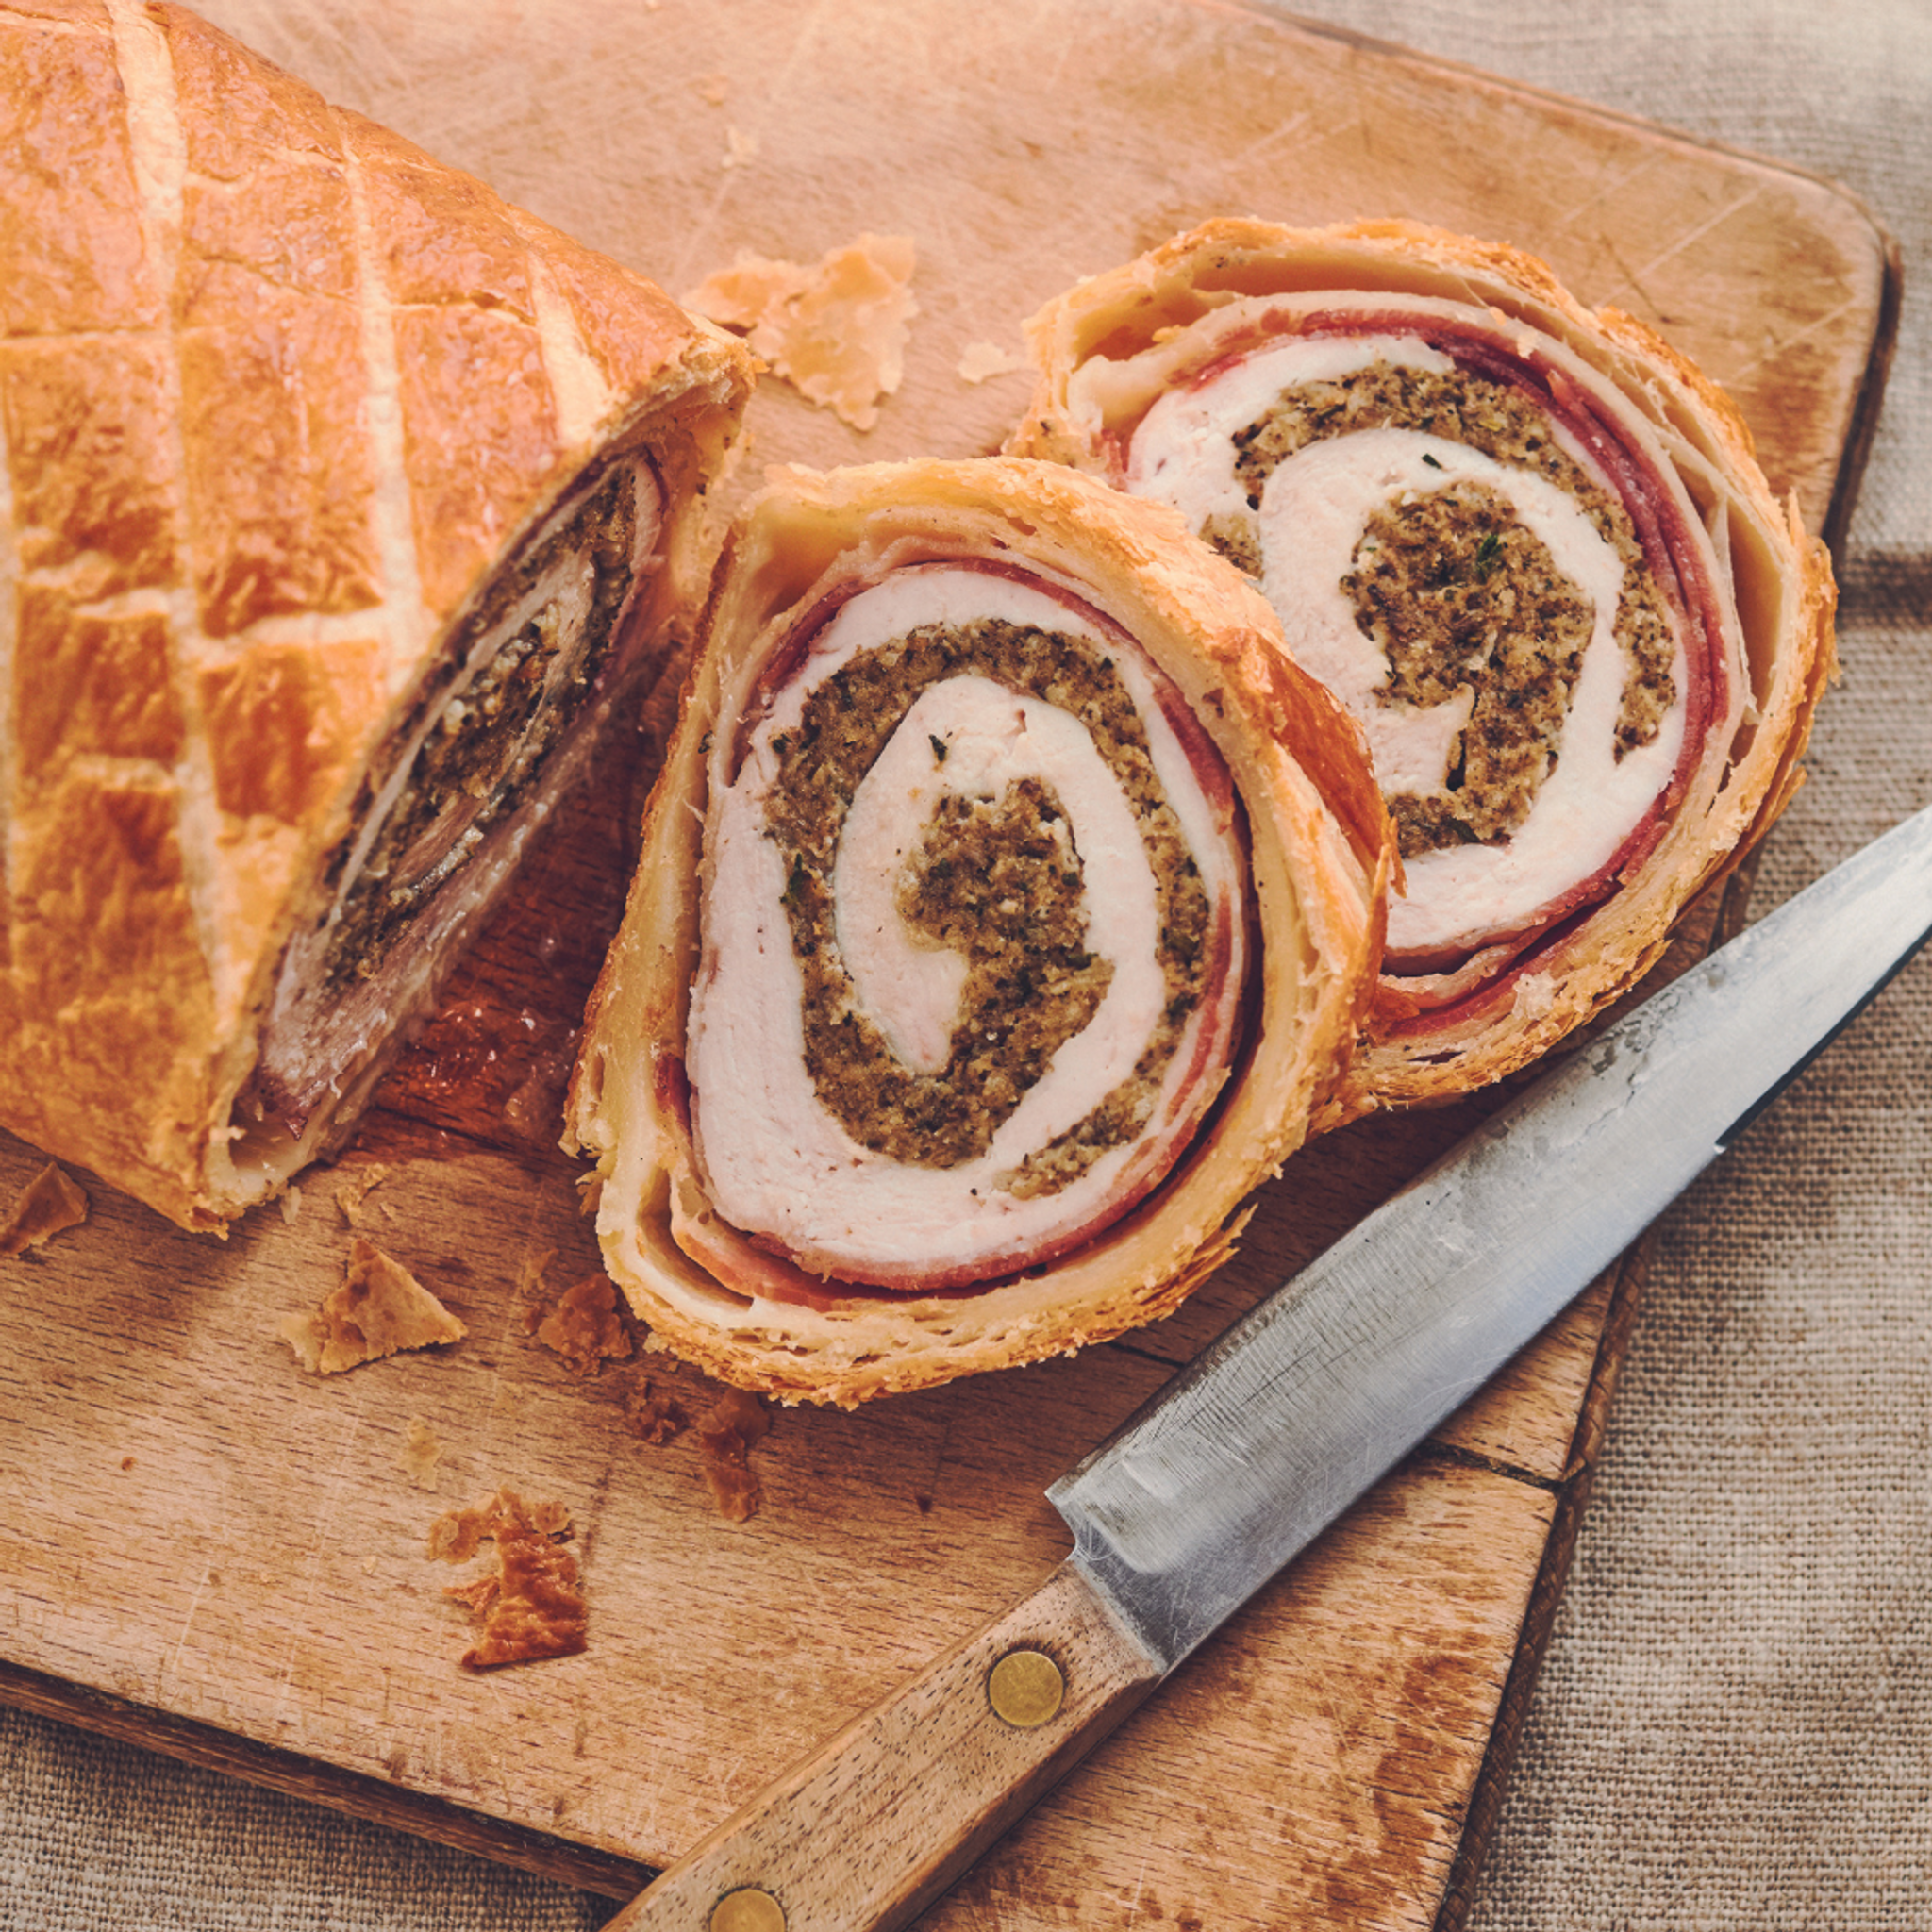 Chicken and mushroom wellington on wooden chopping board with knife